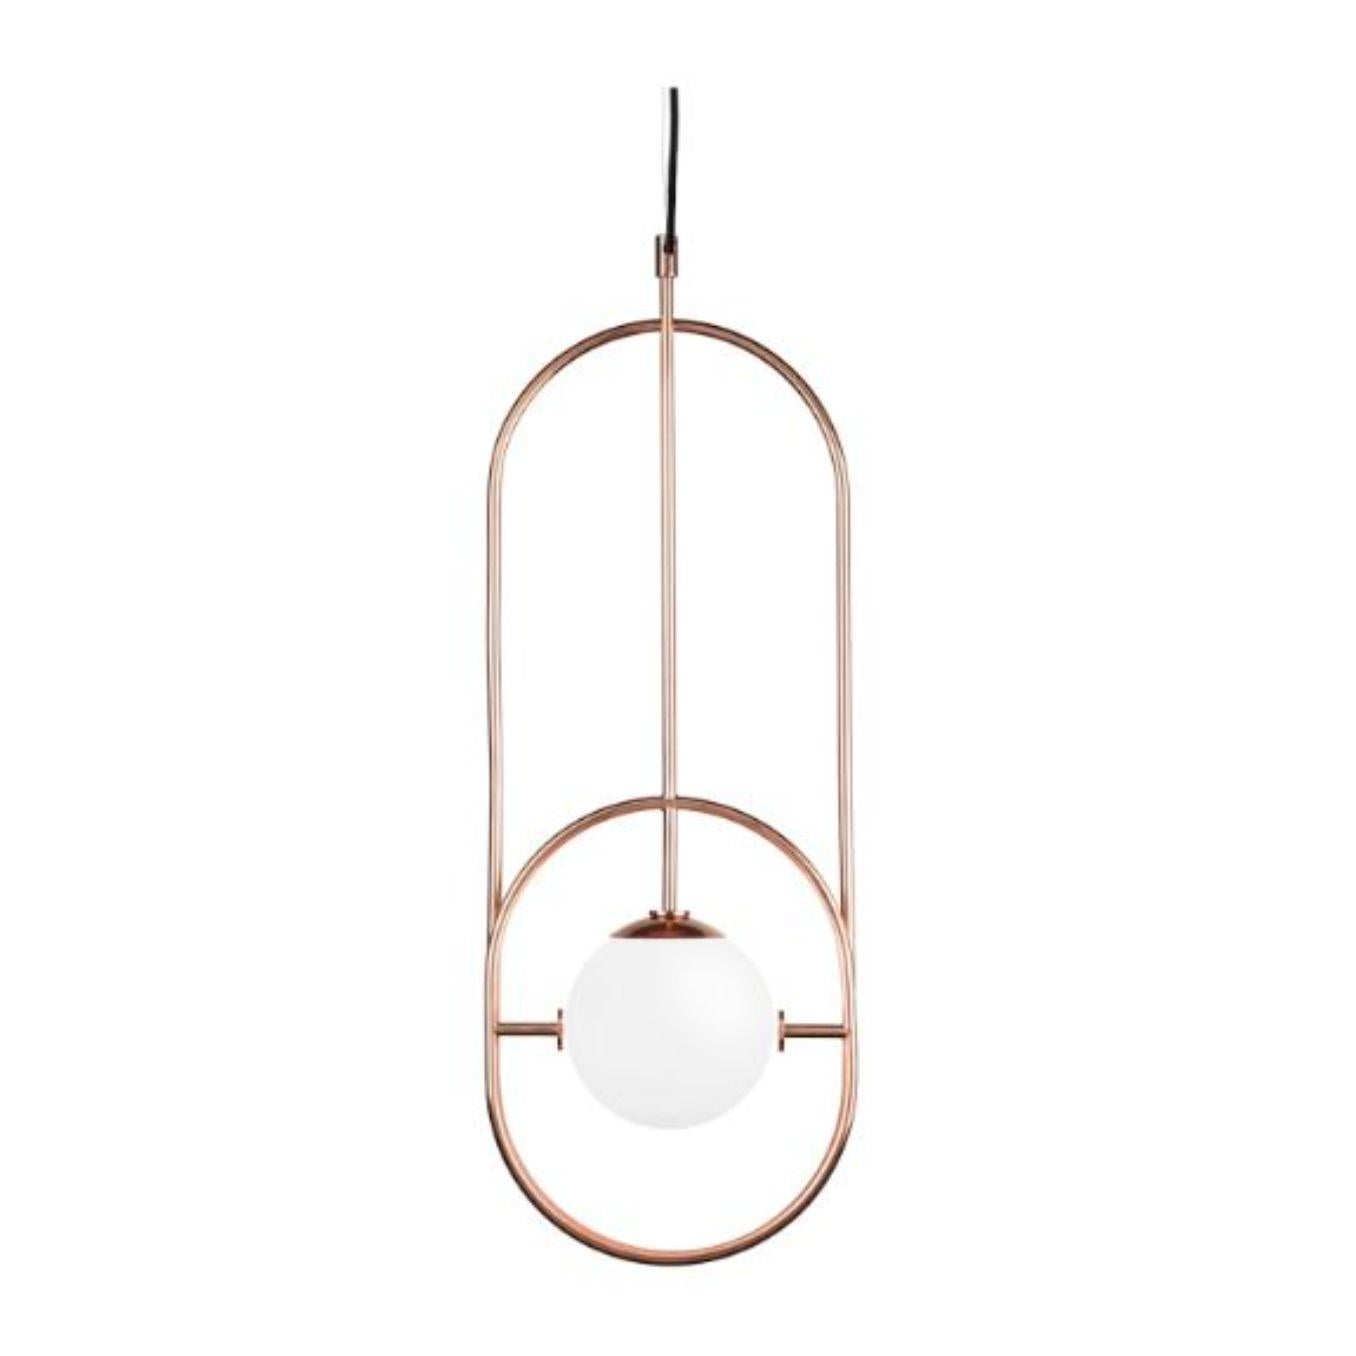 Portuguese Copper Loop I Suspension Lamp by Dooq For Sale